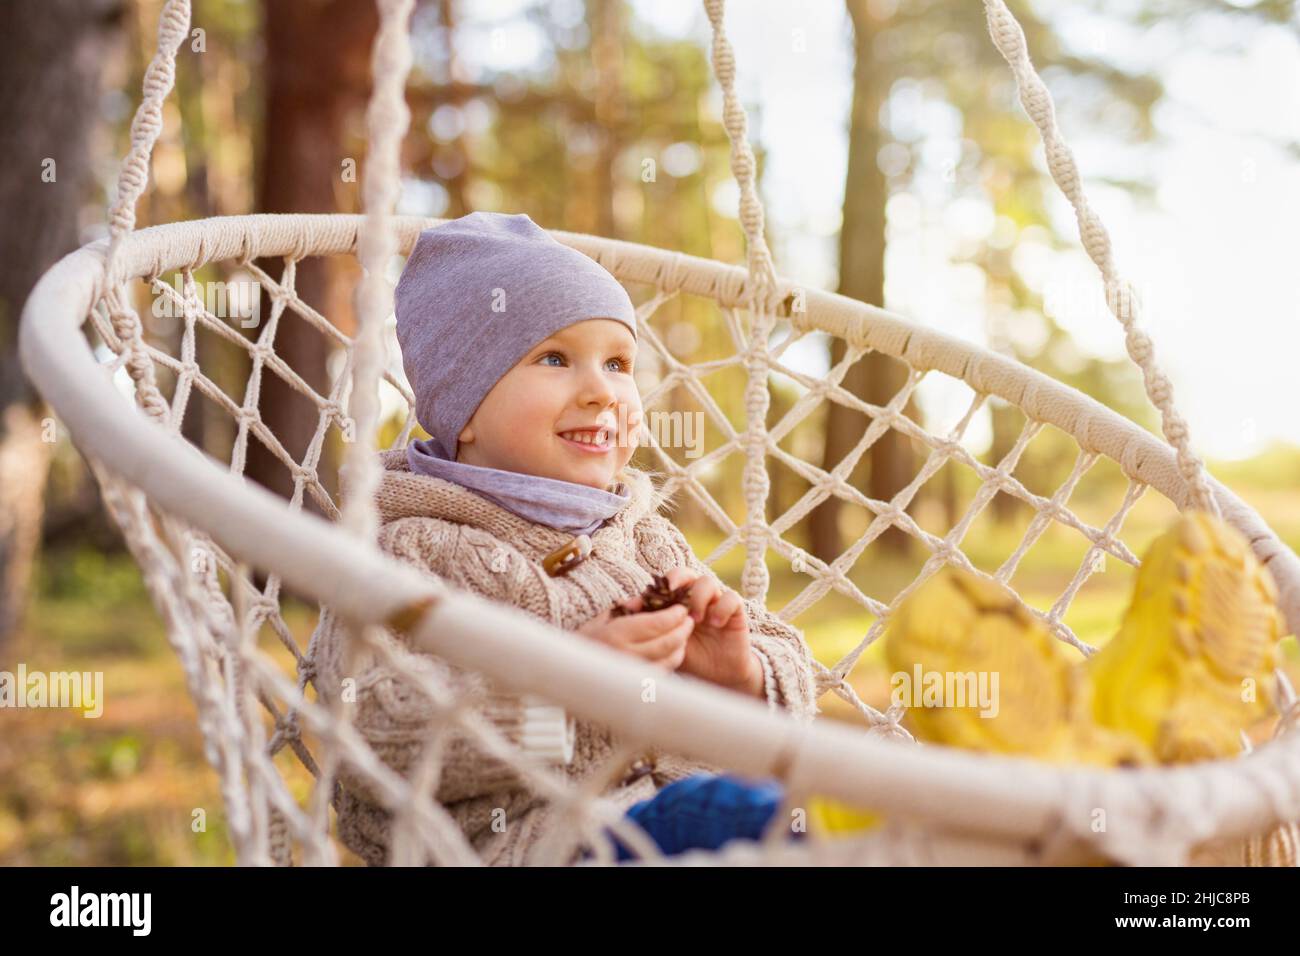 Portrait of happy 3-years-old toddler sitting in a hanging chair or hammock in a forest Stock Photo